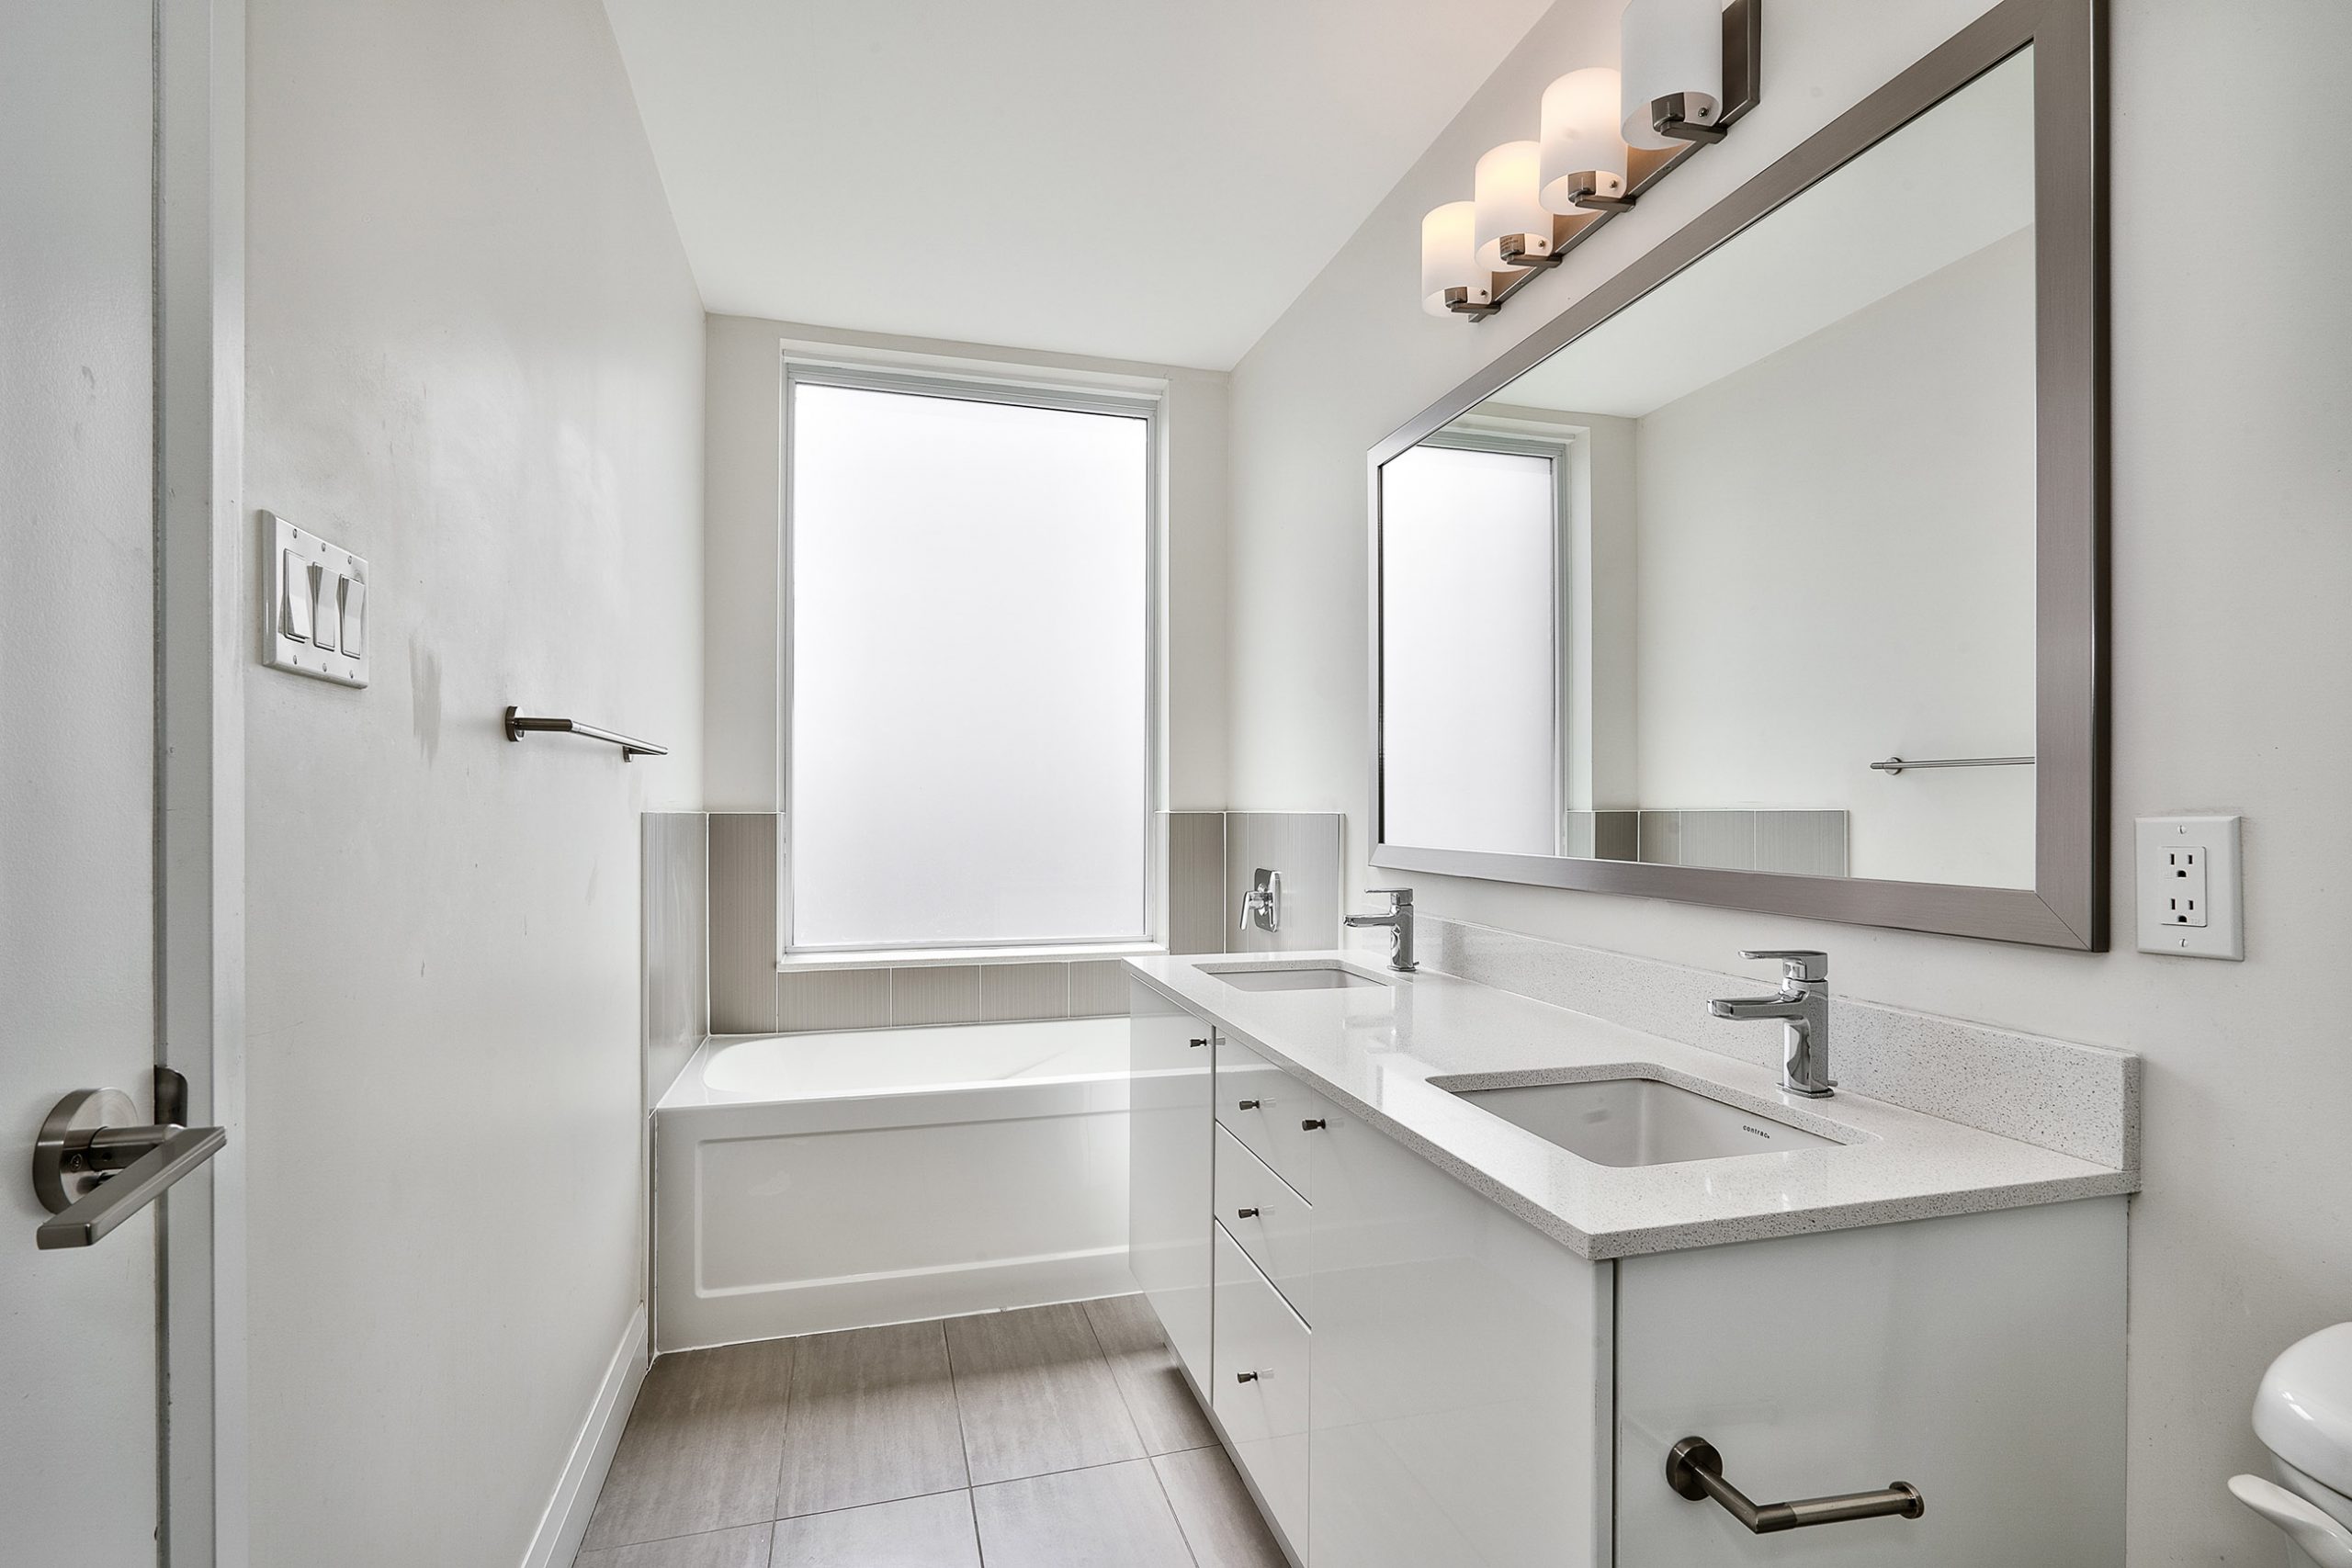 marquee-townhomes-mississauga-for-sale-primary-bedroom-ensuite-bath